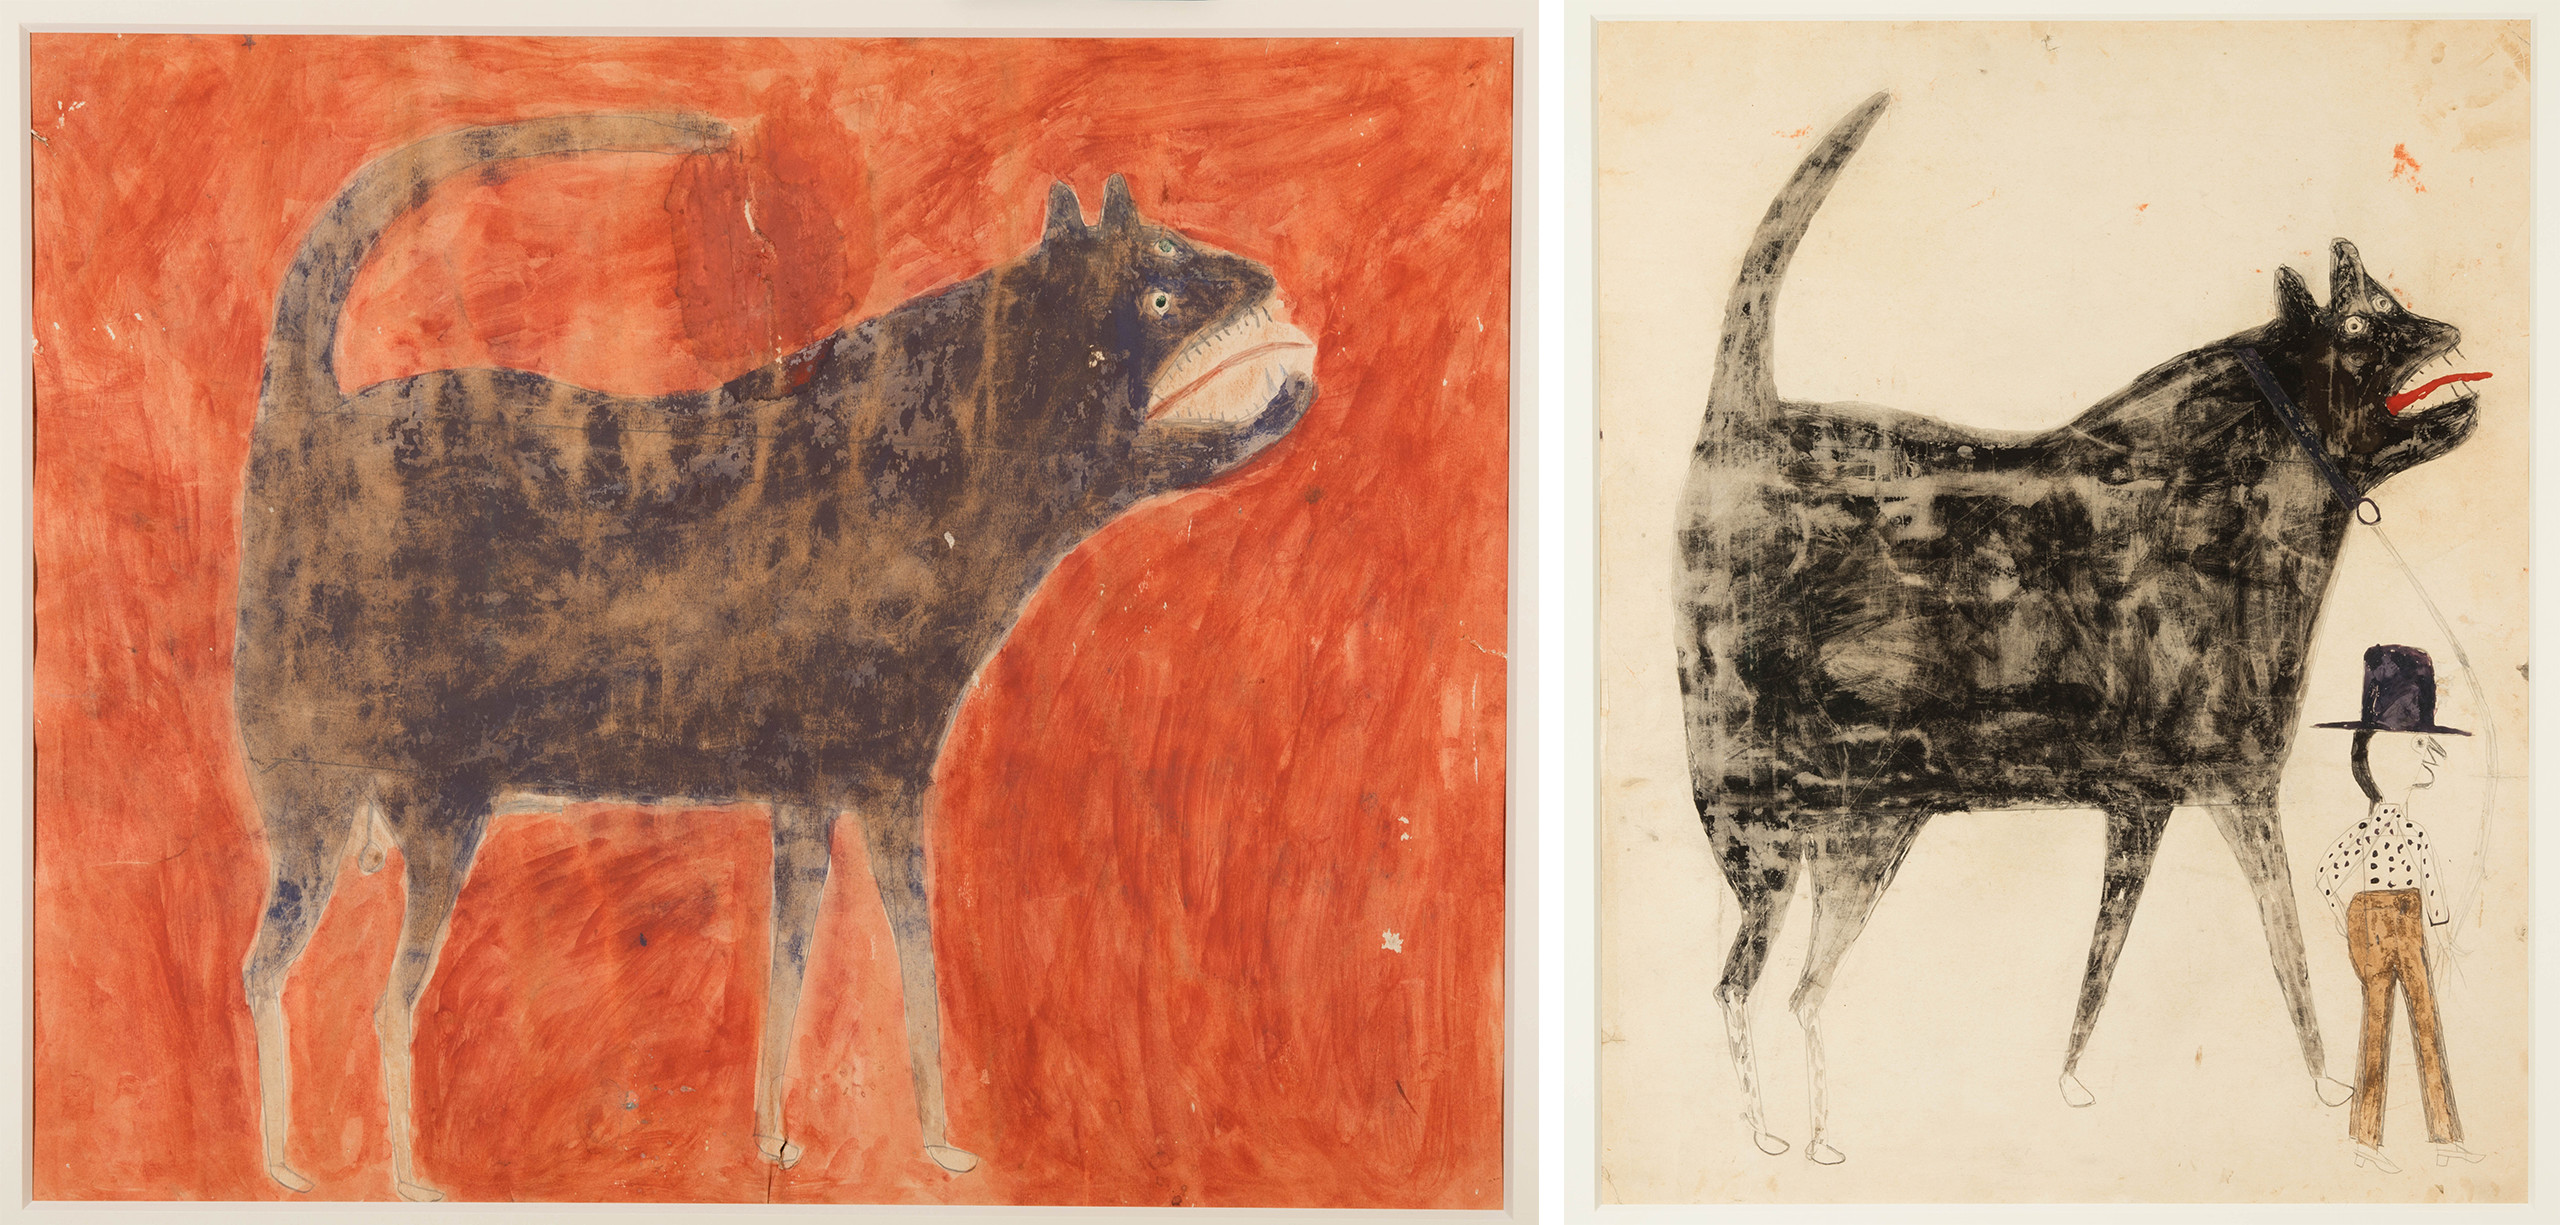 (Left) <em>Mean Dog (Verso: Man Leading Mule)</em>, by Bill Traylor, ca. 1939–1942, poster paint and pencil on cardboard. Collection of Jerry and Susan Lauren. Photo: Matt Flynn © Smithsonian Institution. (Right) <em>Man and Large Dog (Verso: Man and Woman)</em>, by Bill Traylor, ca. 1939–1942, poster paint and pencil on cardboard. Collection of Jerry and Susan Lauren. Photo: Matt Flynn © Smithsonian Institution 